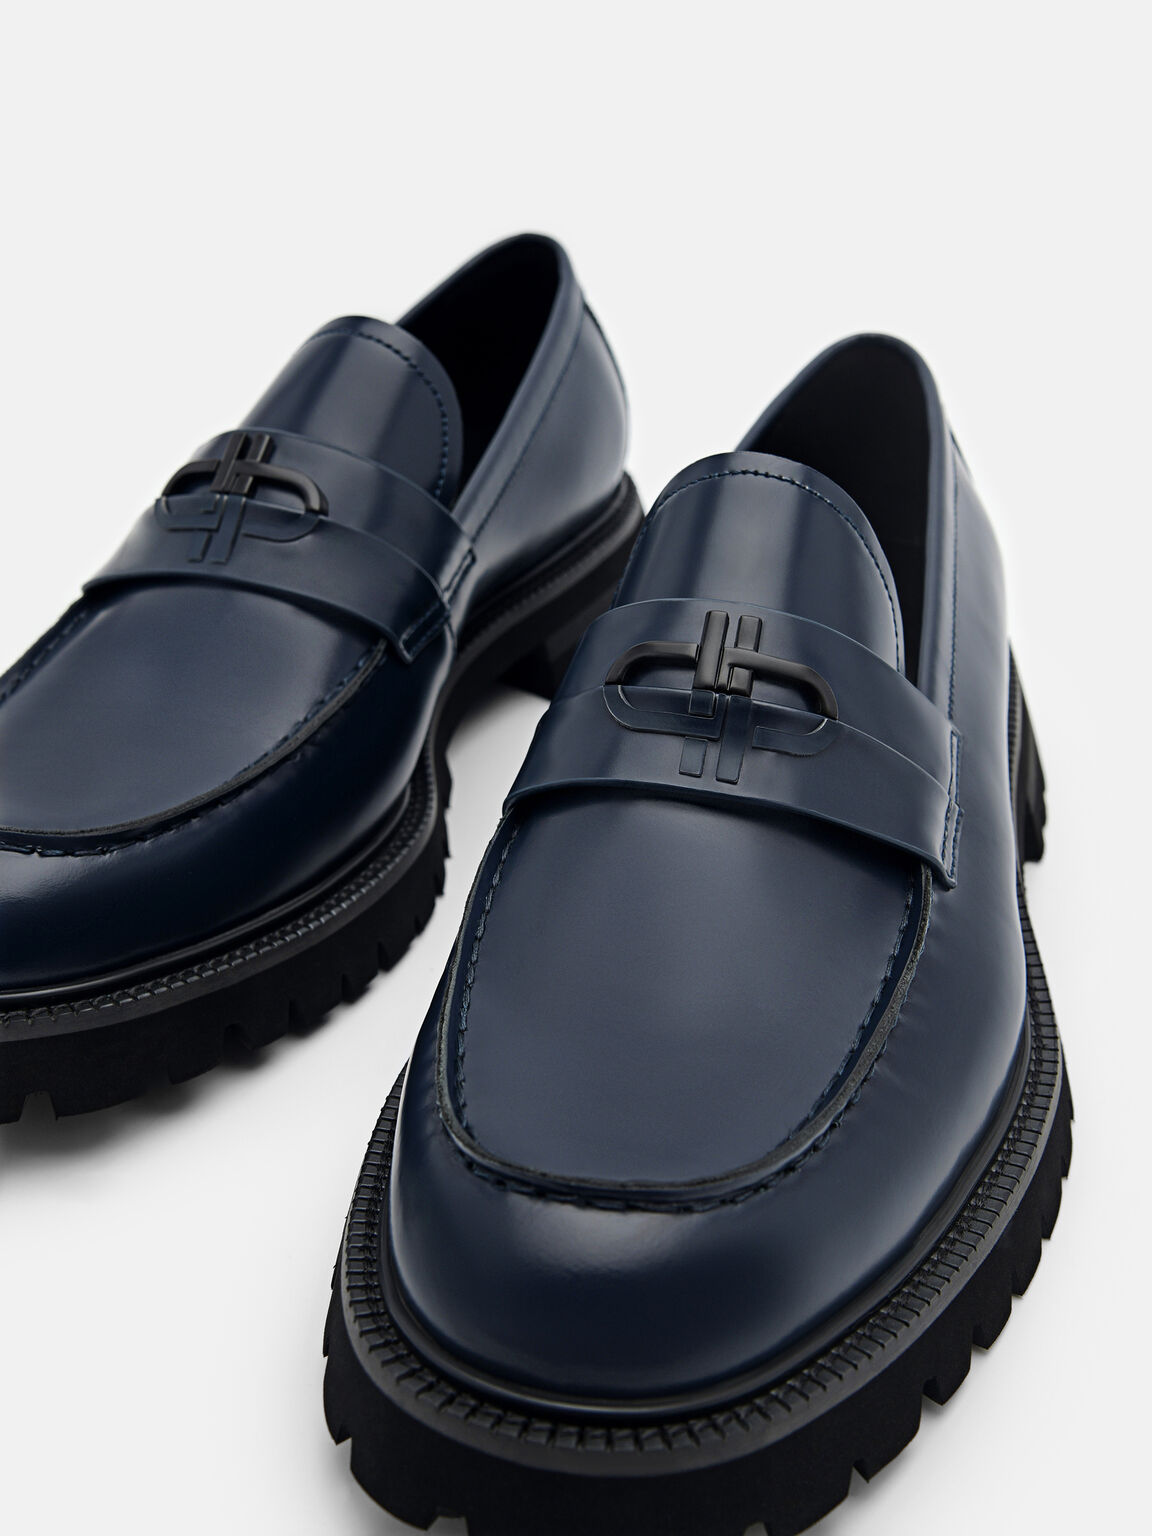 PEDRO Icon Leather Loafers, Navy, hi-res